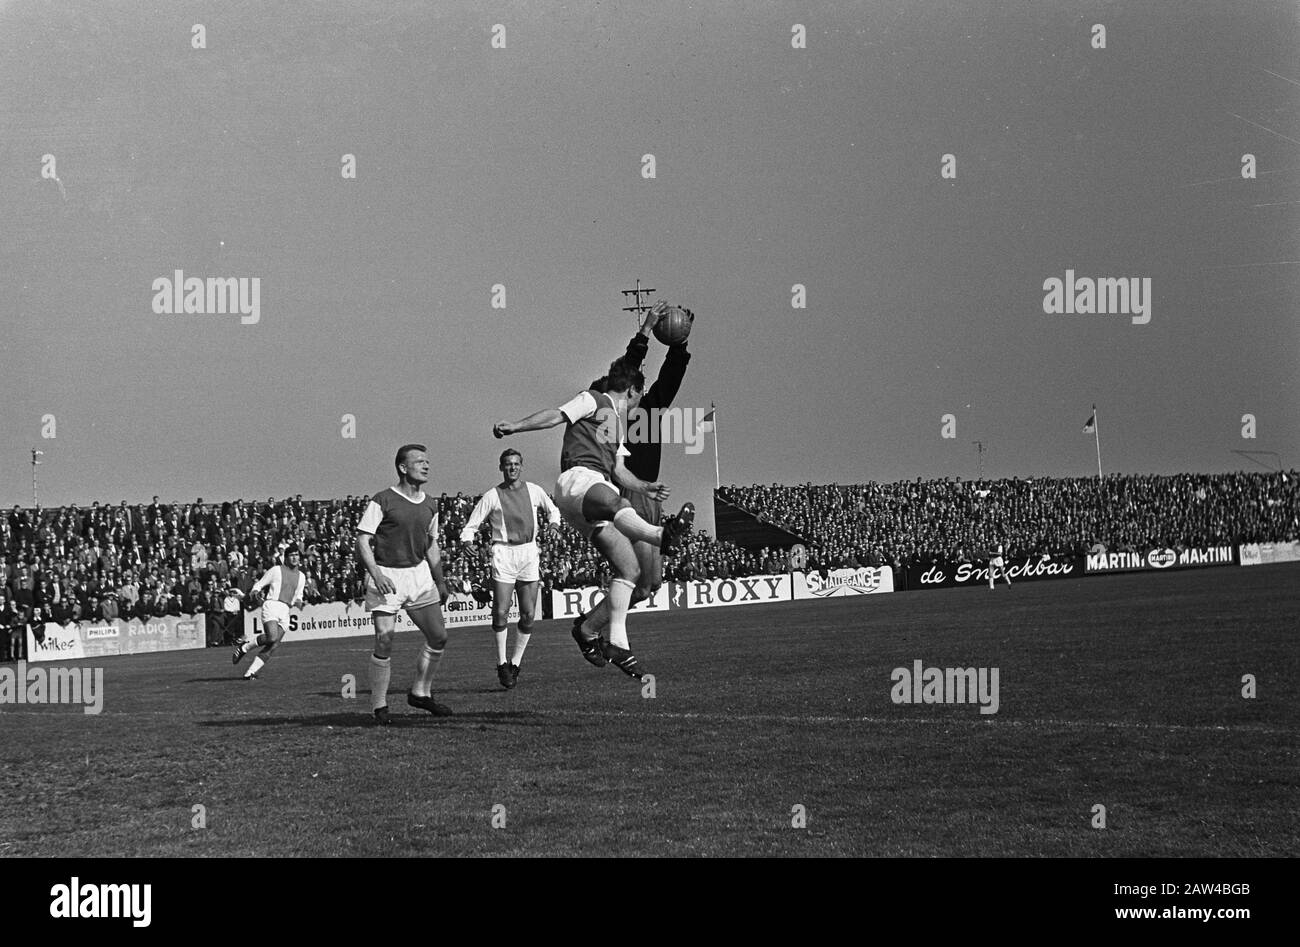 RCH against Ajax 2-0 cup football game moments Date: October 4, 1964 Location: Heemstede Keywords: sport, football Institution Name: AJAX Stock Photo